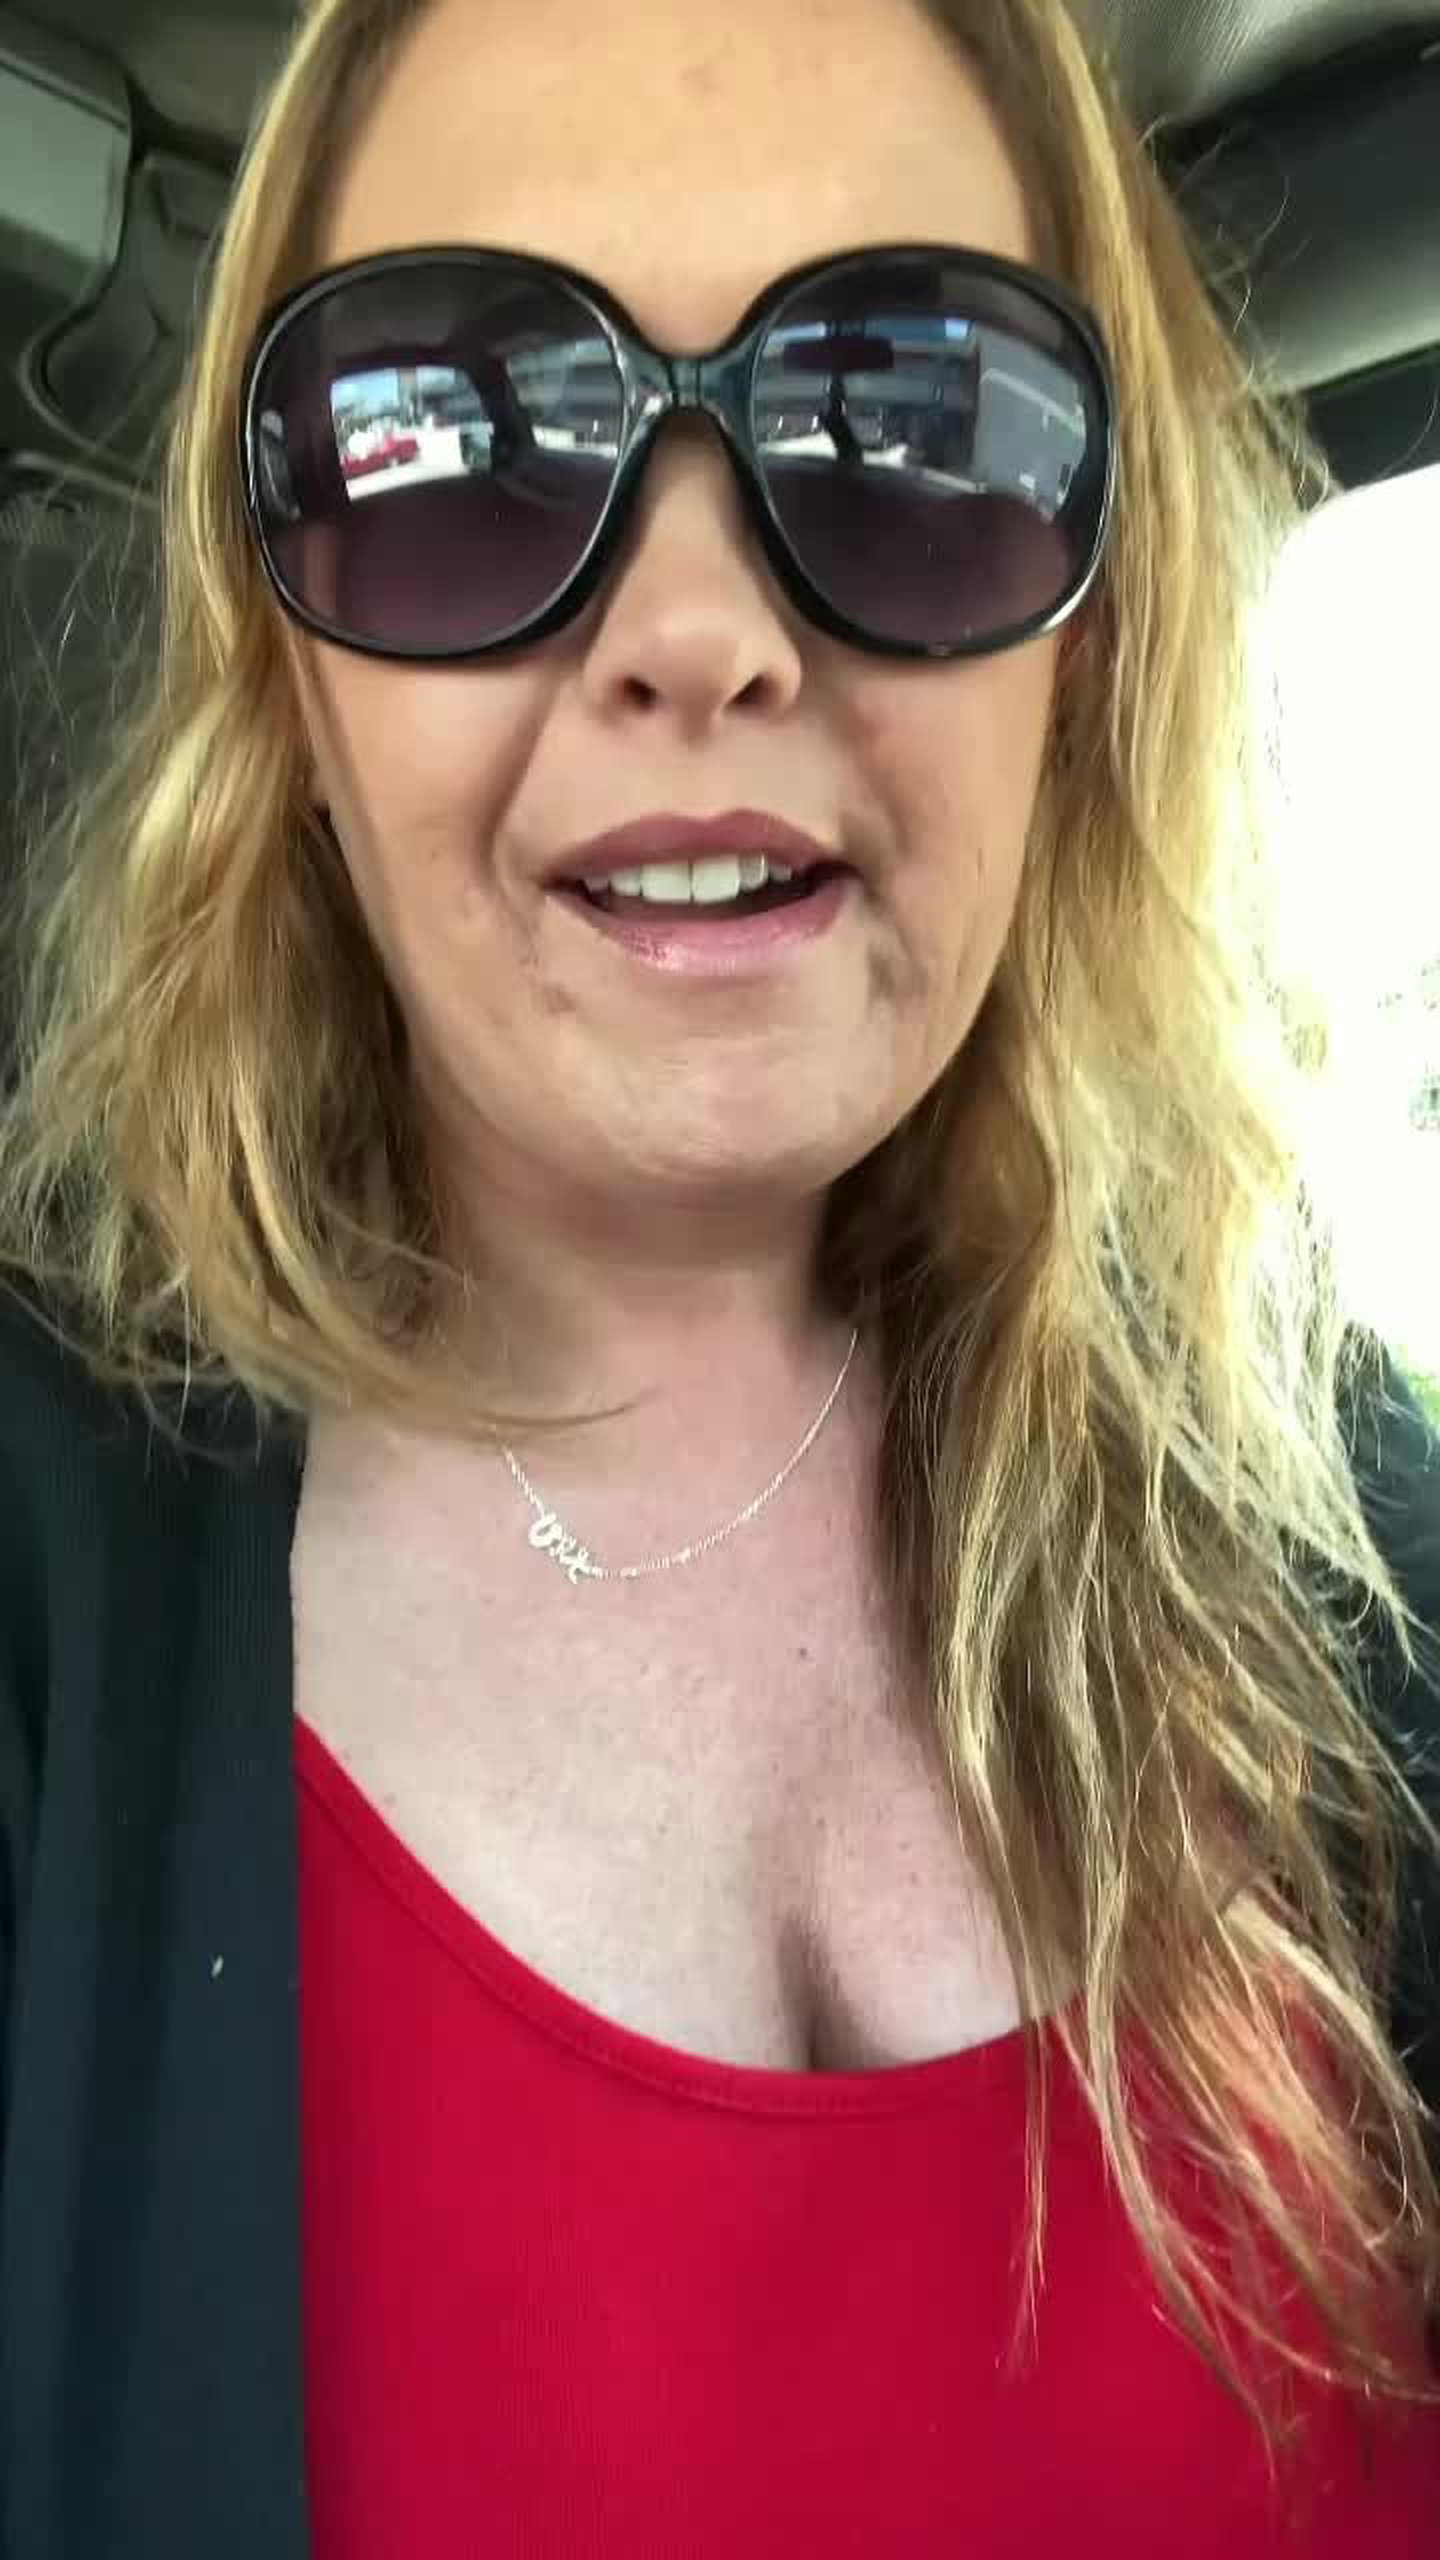 Video by Denise La Fleur with the username @deniselafleur, who is a star user,  June 12, 2021 at 11:35 AM. The post is about the topic Hotwife and the text says 'Finally had a play date, today, with one of my regular playmates…it was SO good to feel his dick inside me!!!…😈🍆
#playdate #afternoonrendezvous #hotwife'